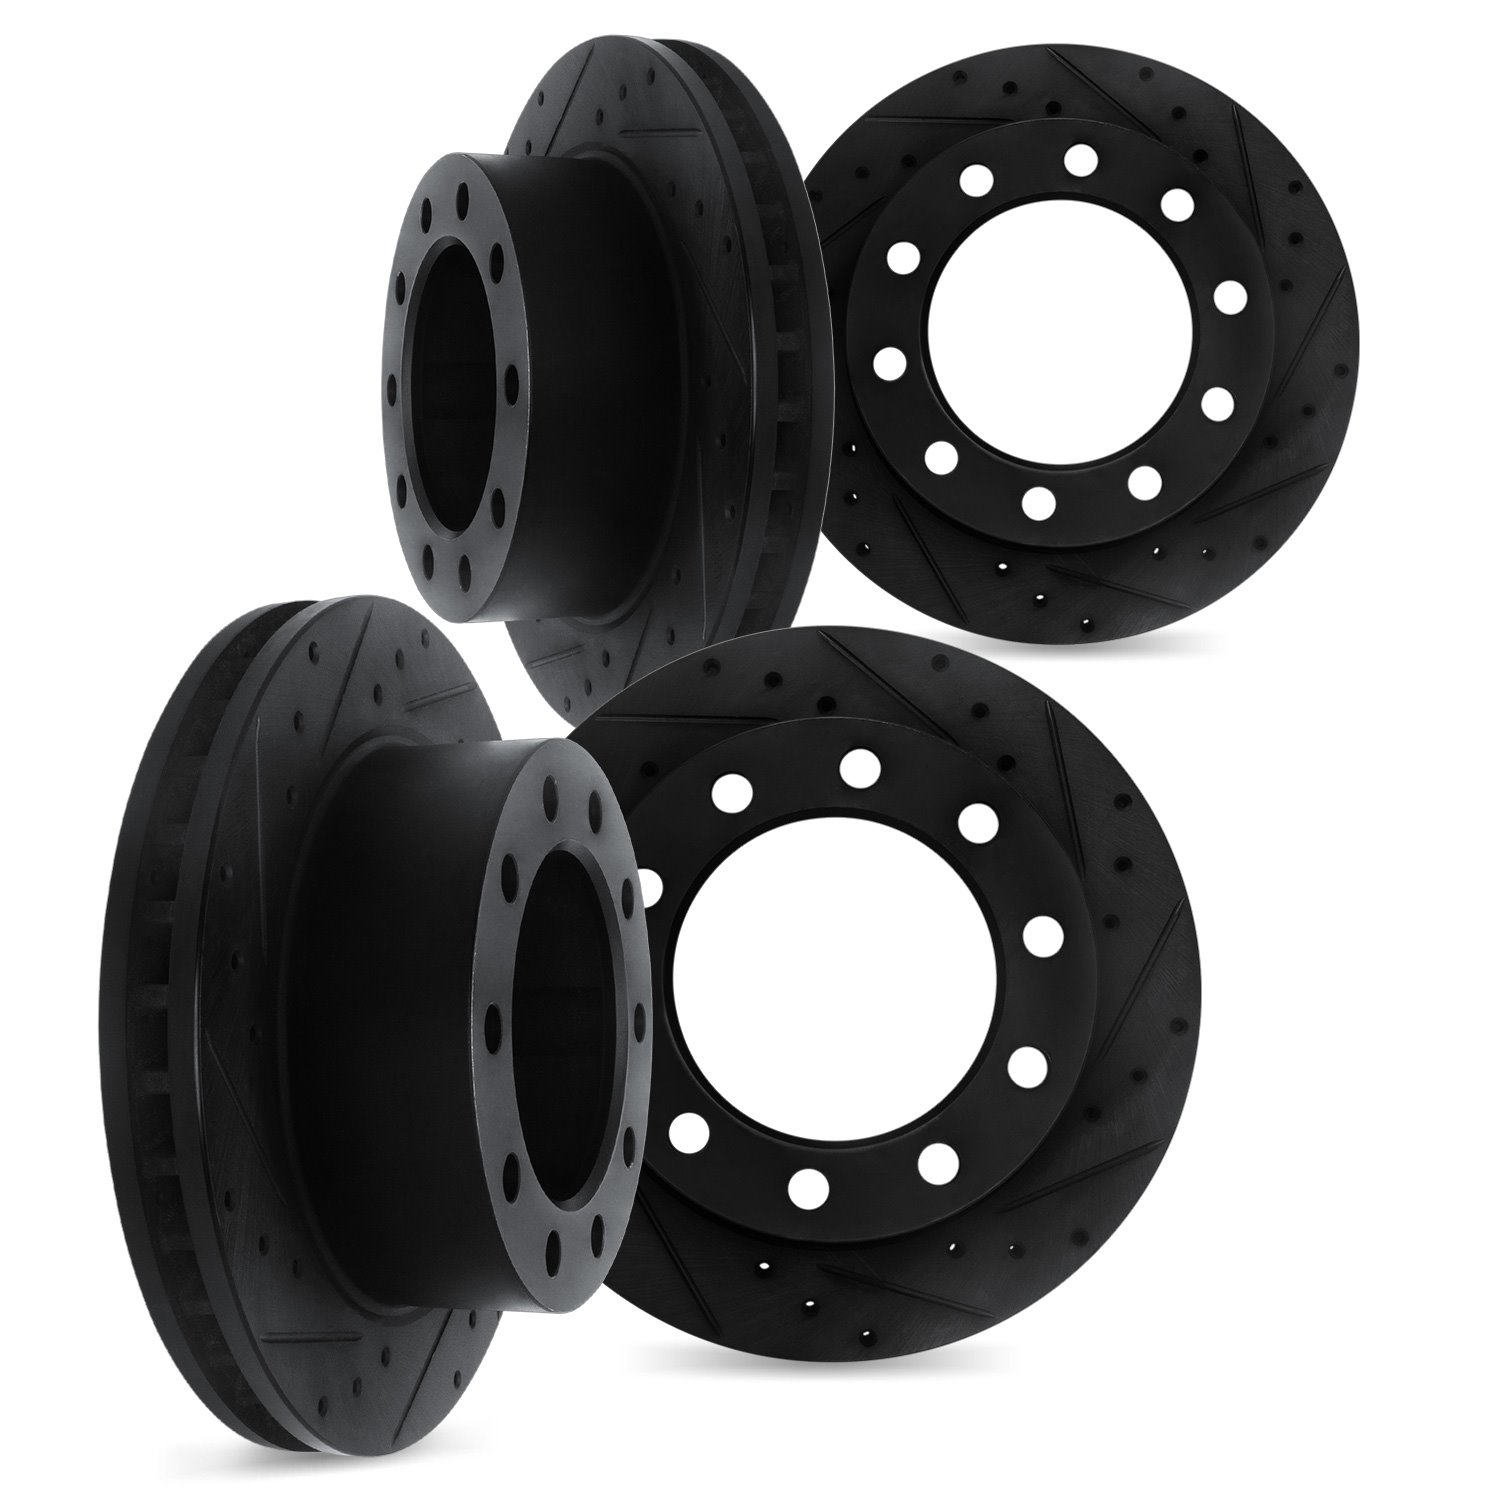 8004-54375 Drilled/Slotted Brake Rotors [Black], Fits Select Ford/Lincoln/Mercury/Mazda, Position: Front and Rear